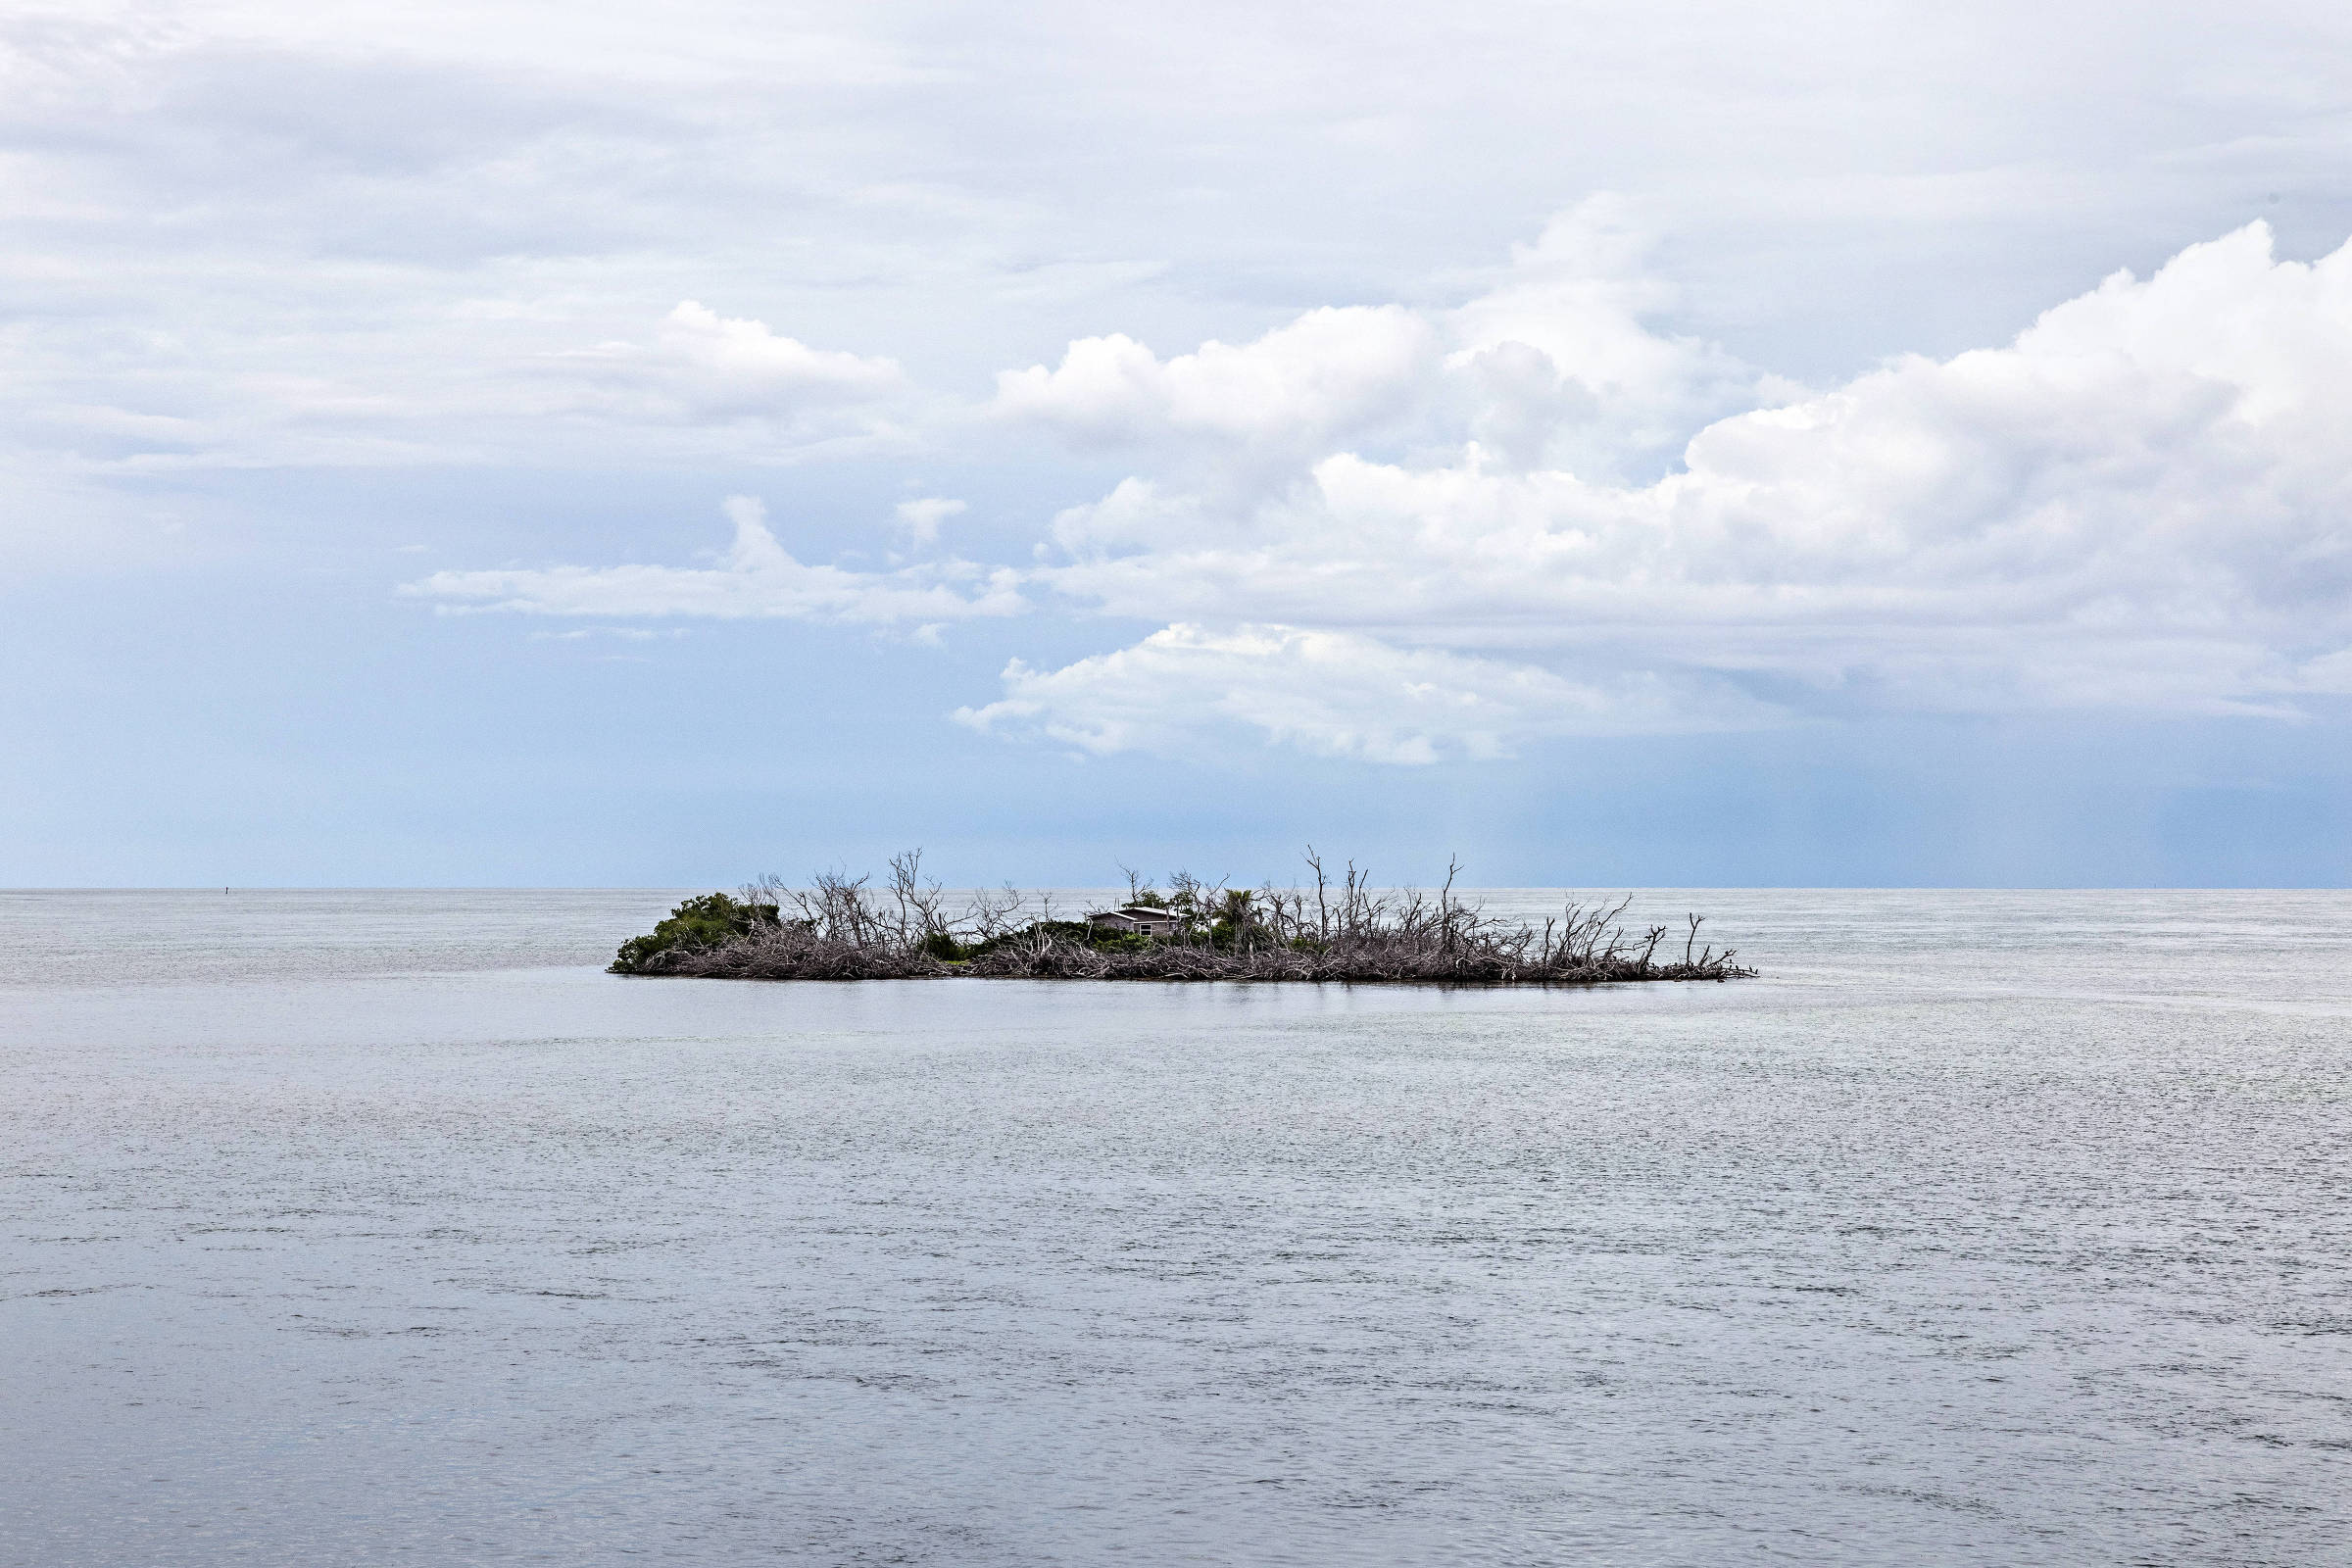 Island house with dead vegetation near the Overseas Highway, in the region known as the Florida Keys, in the south of the United States